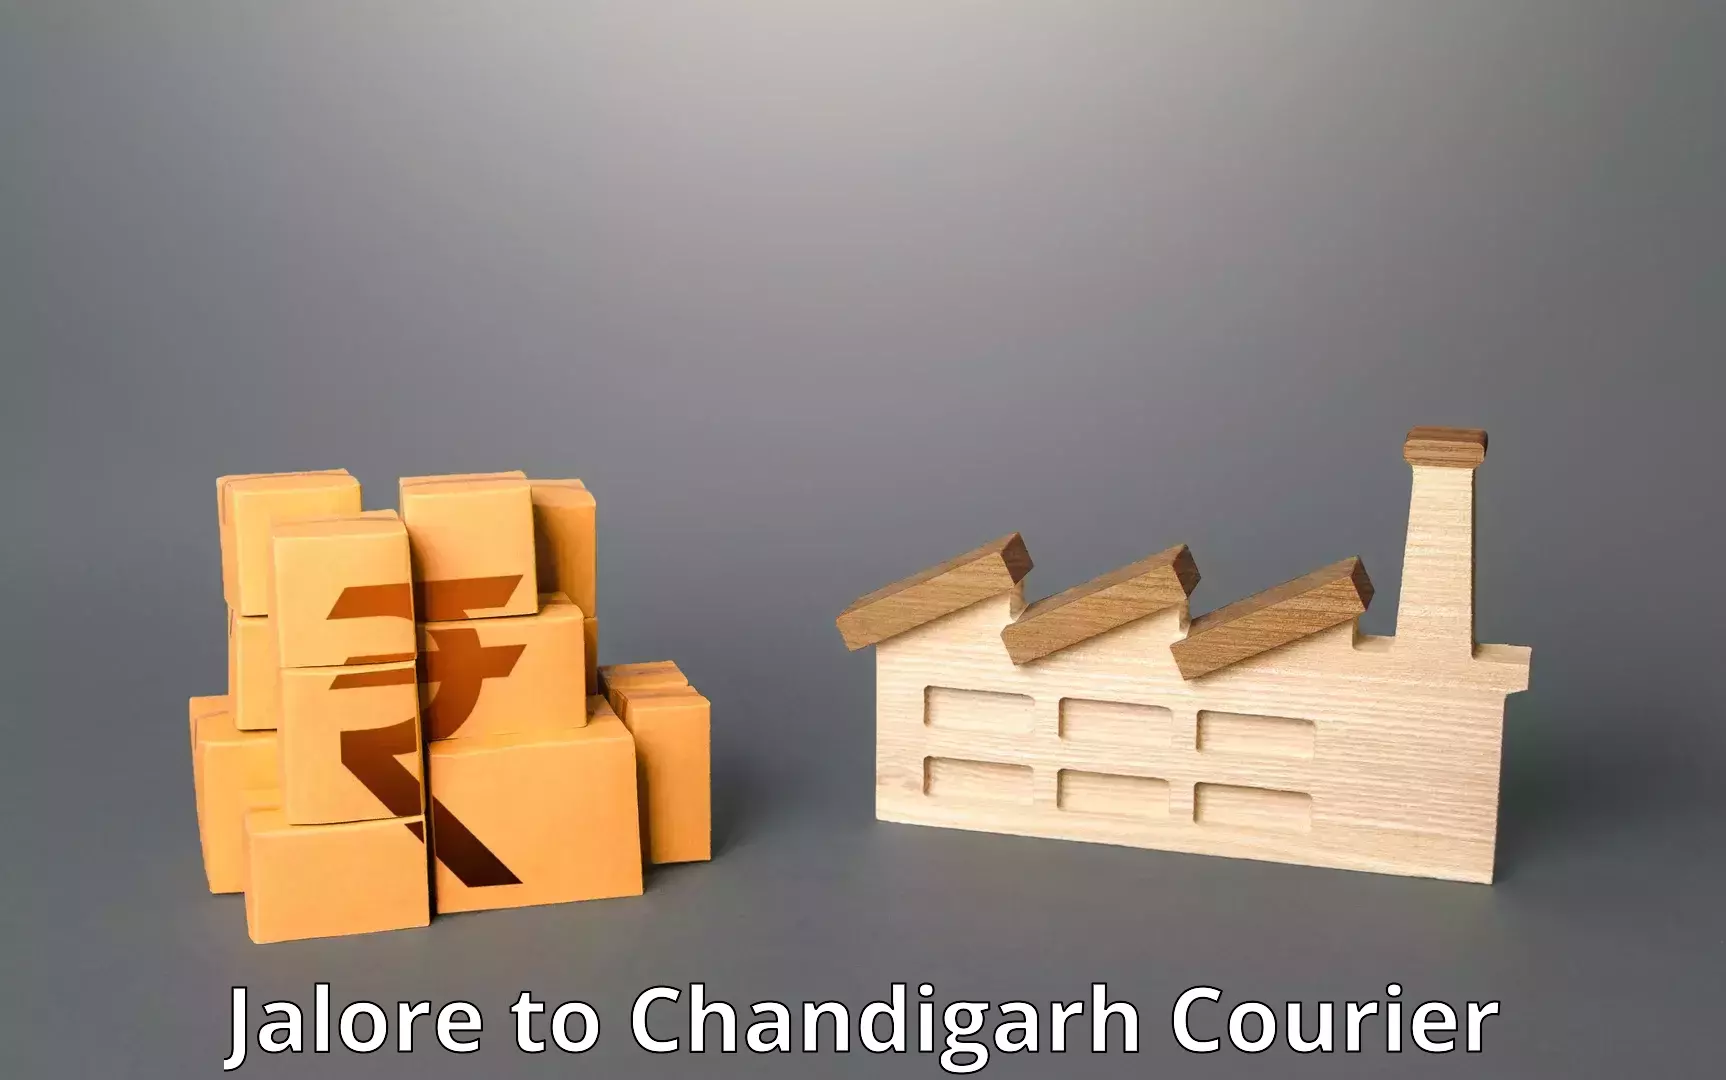 Business delivery service Jalore to Chandigarh